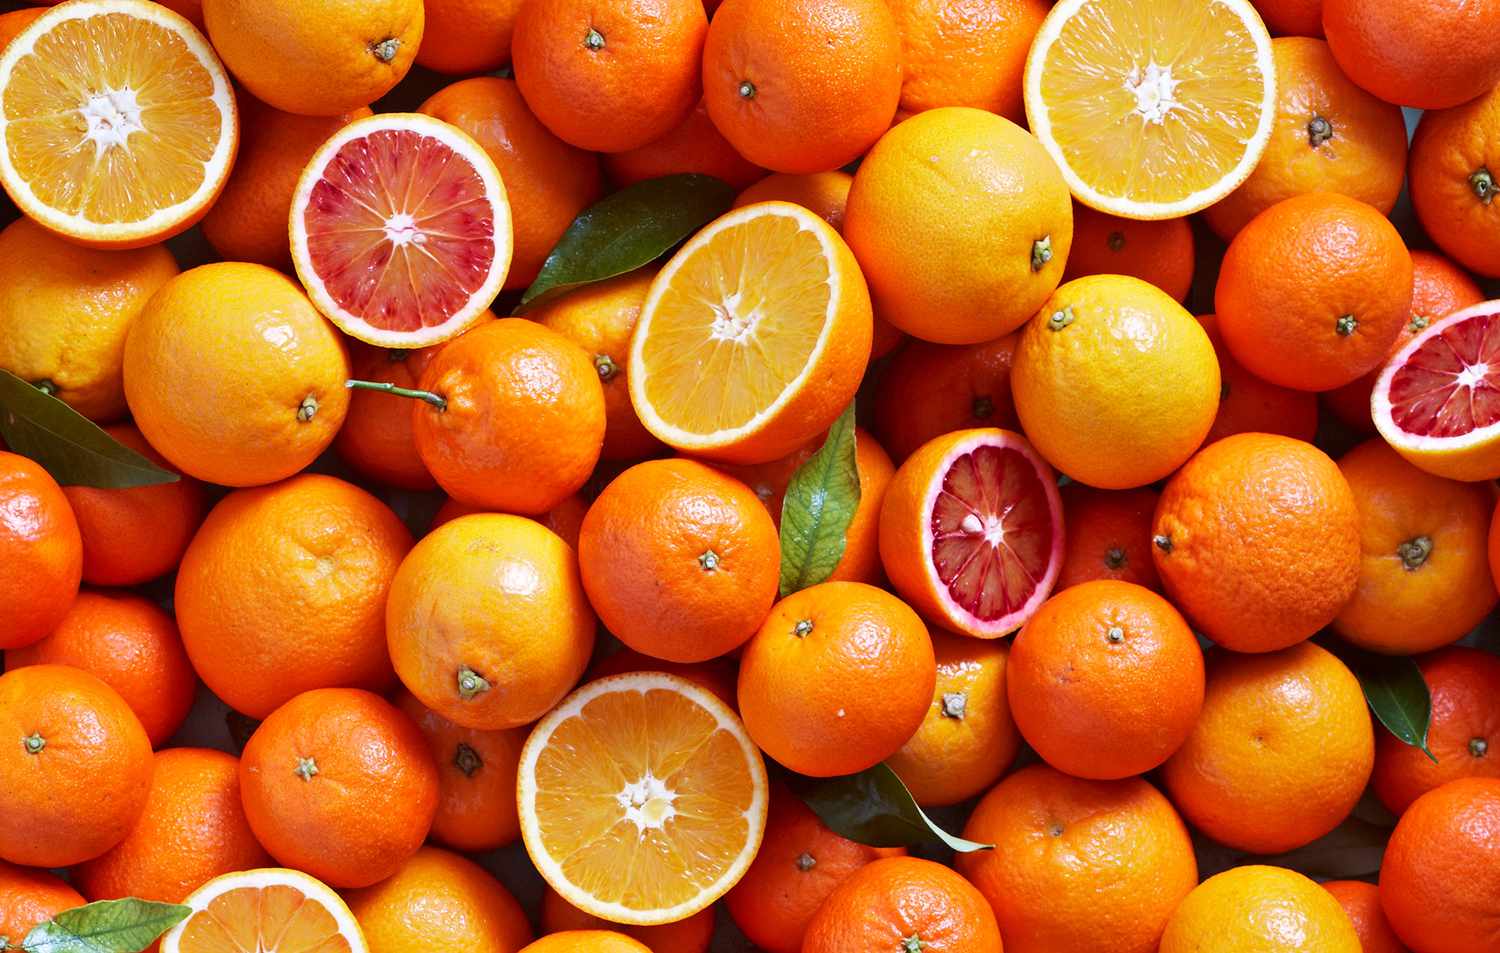 different types of oranges such as blood orange, mandarins and naval oranges overhead with some sliced open